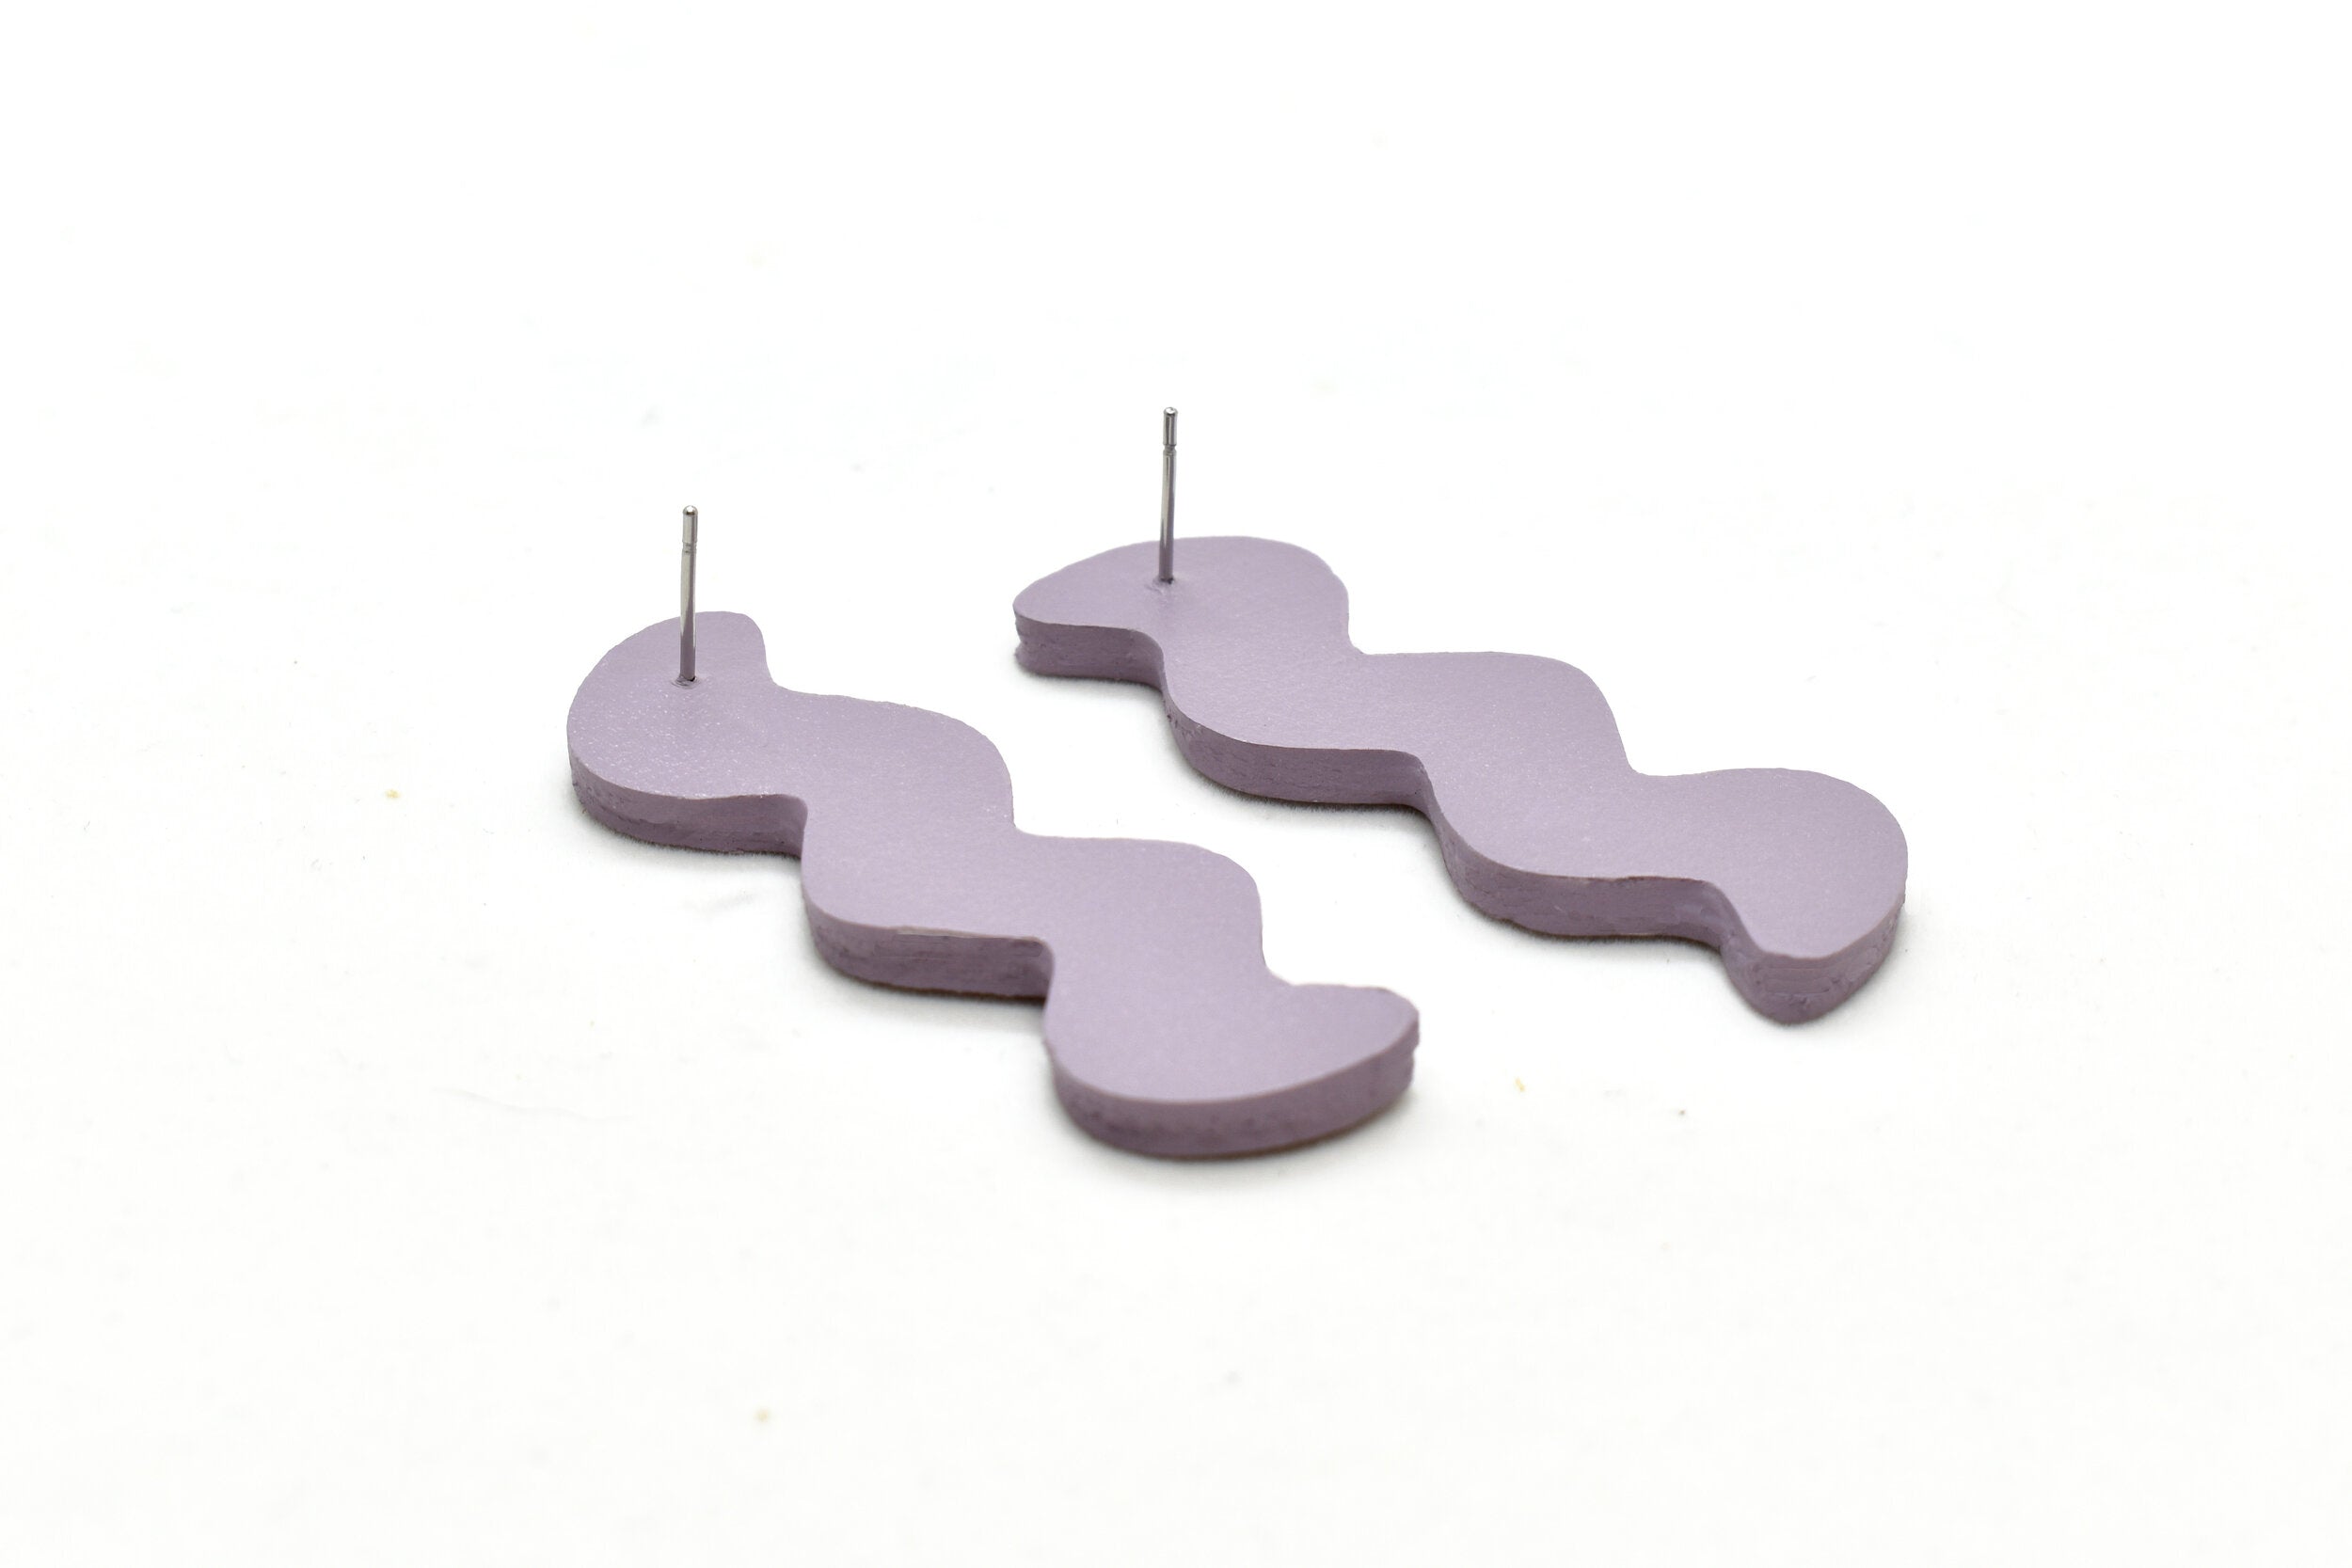 Art Earrings in Authentic Lavender Leather.